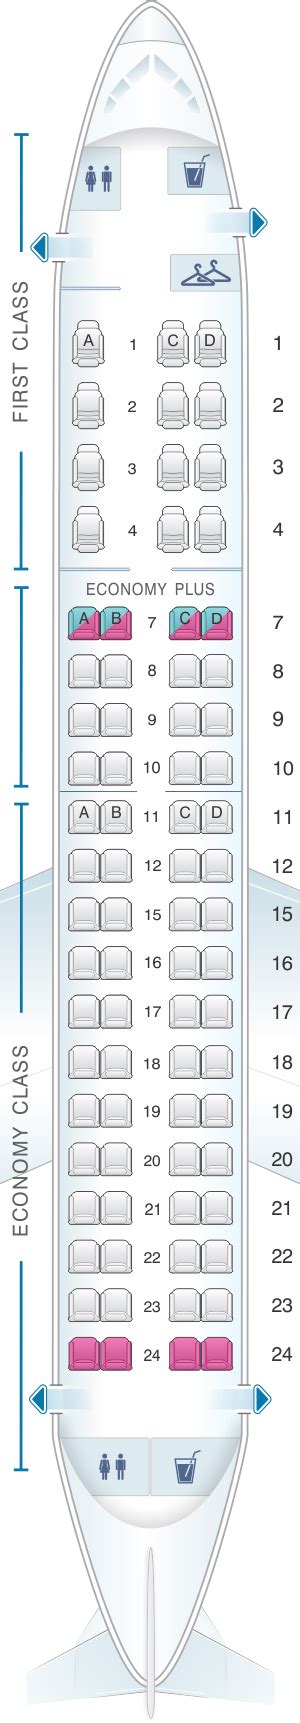 Embraer 175 Travel time: 1h 34m; Main Cabin Ex